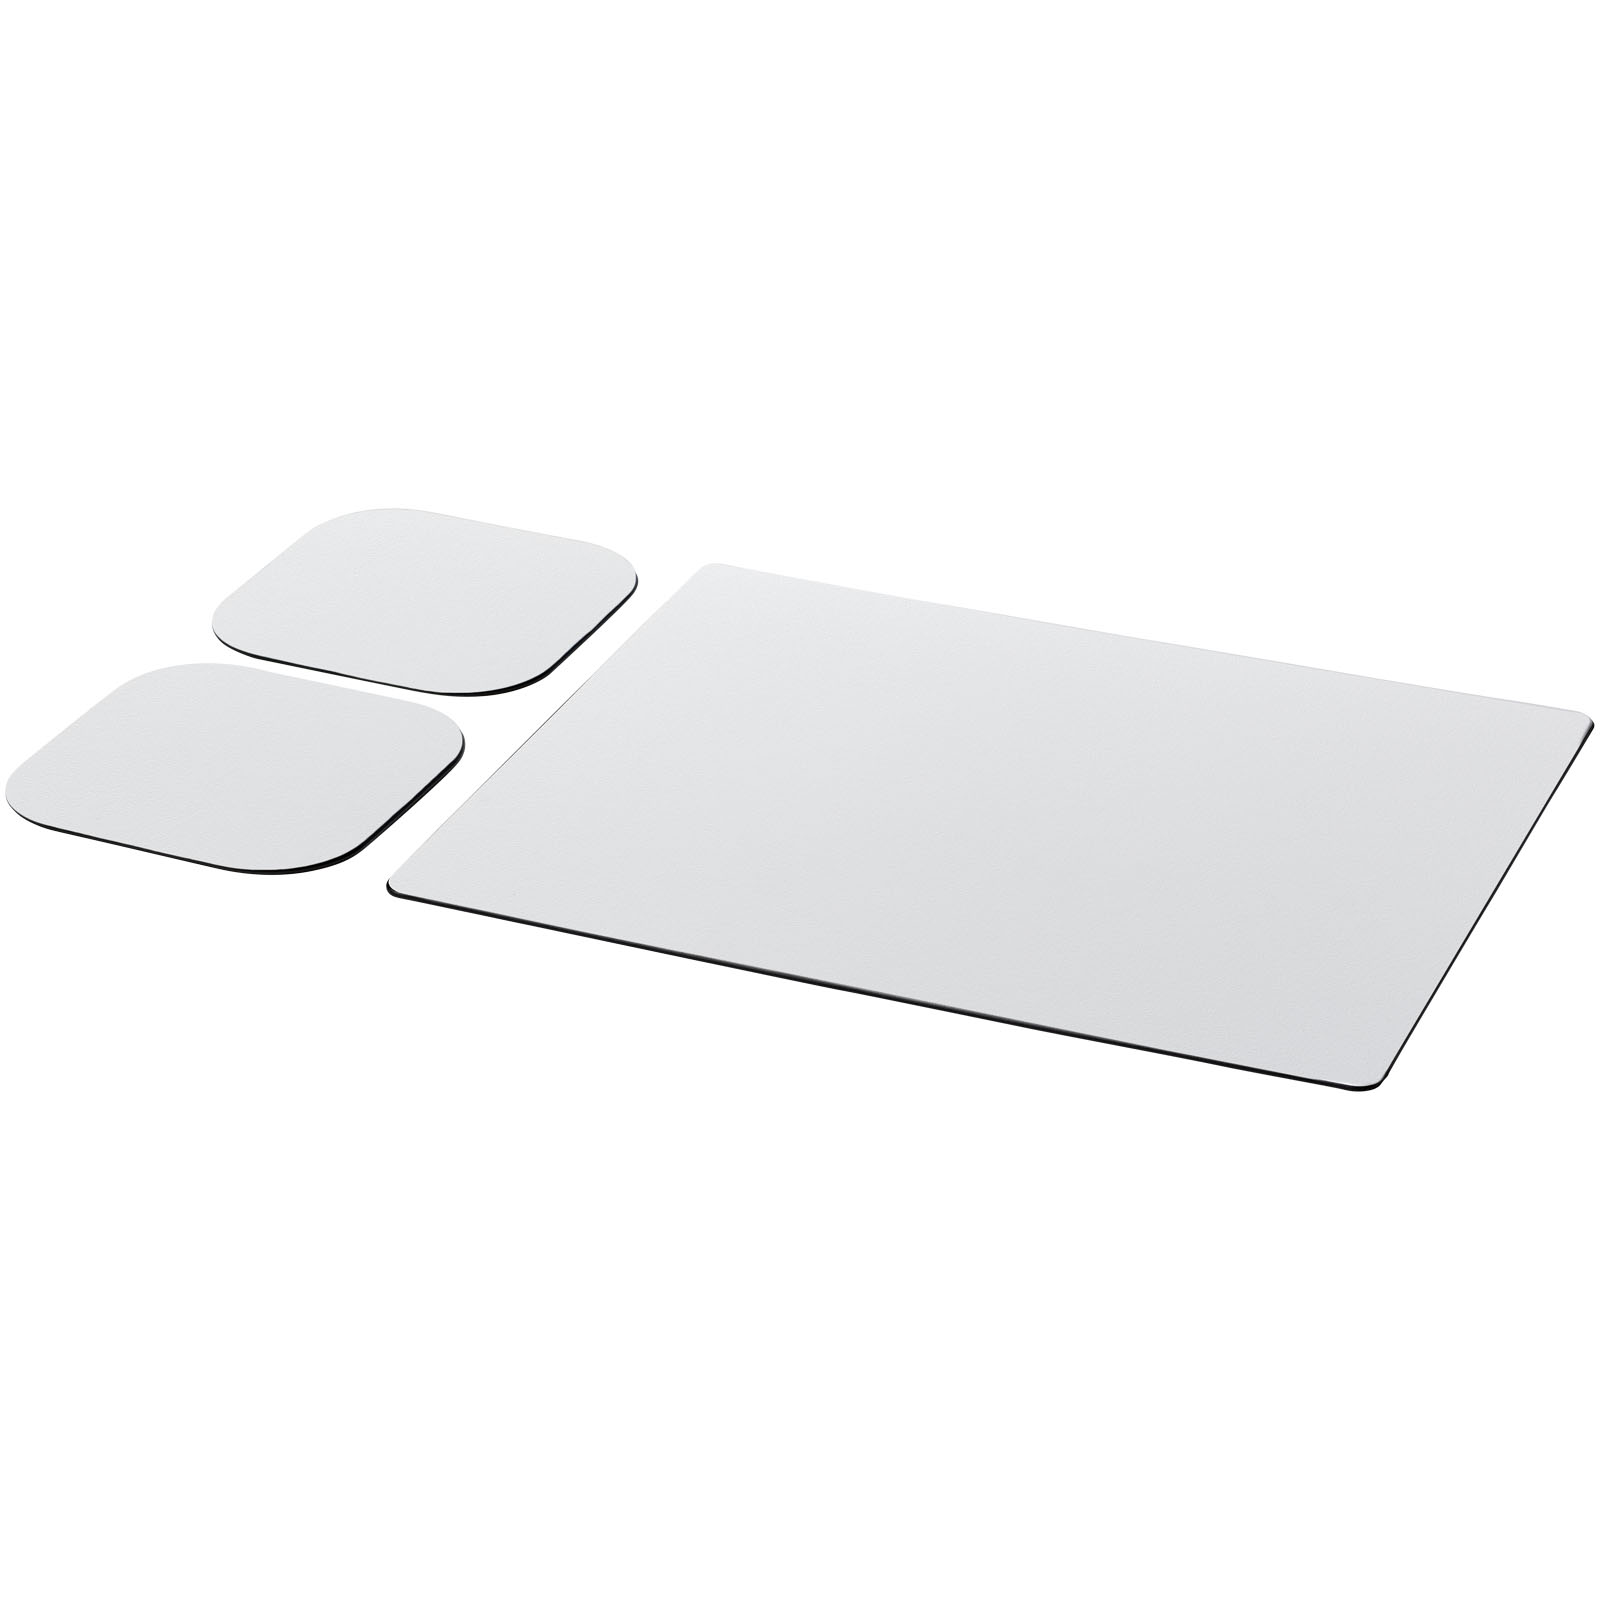 Advertising Computer Accessories - Brite-Mat® mouse mat and coaster set combo 3 - 4